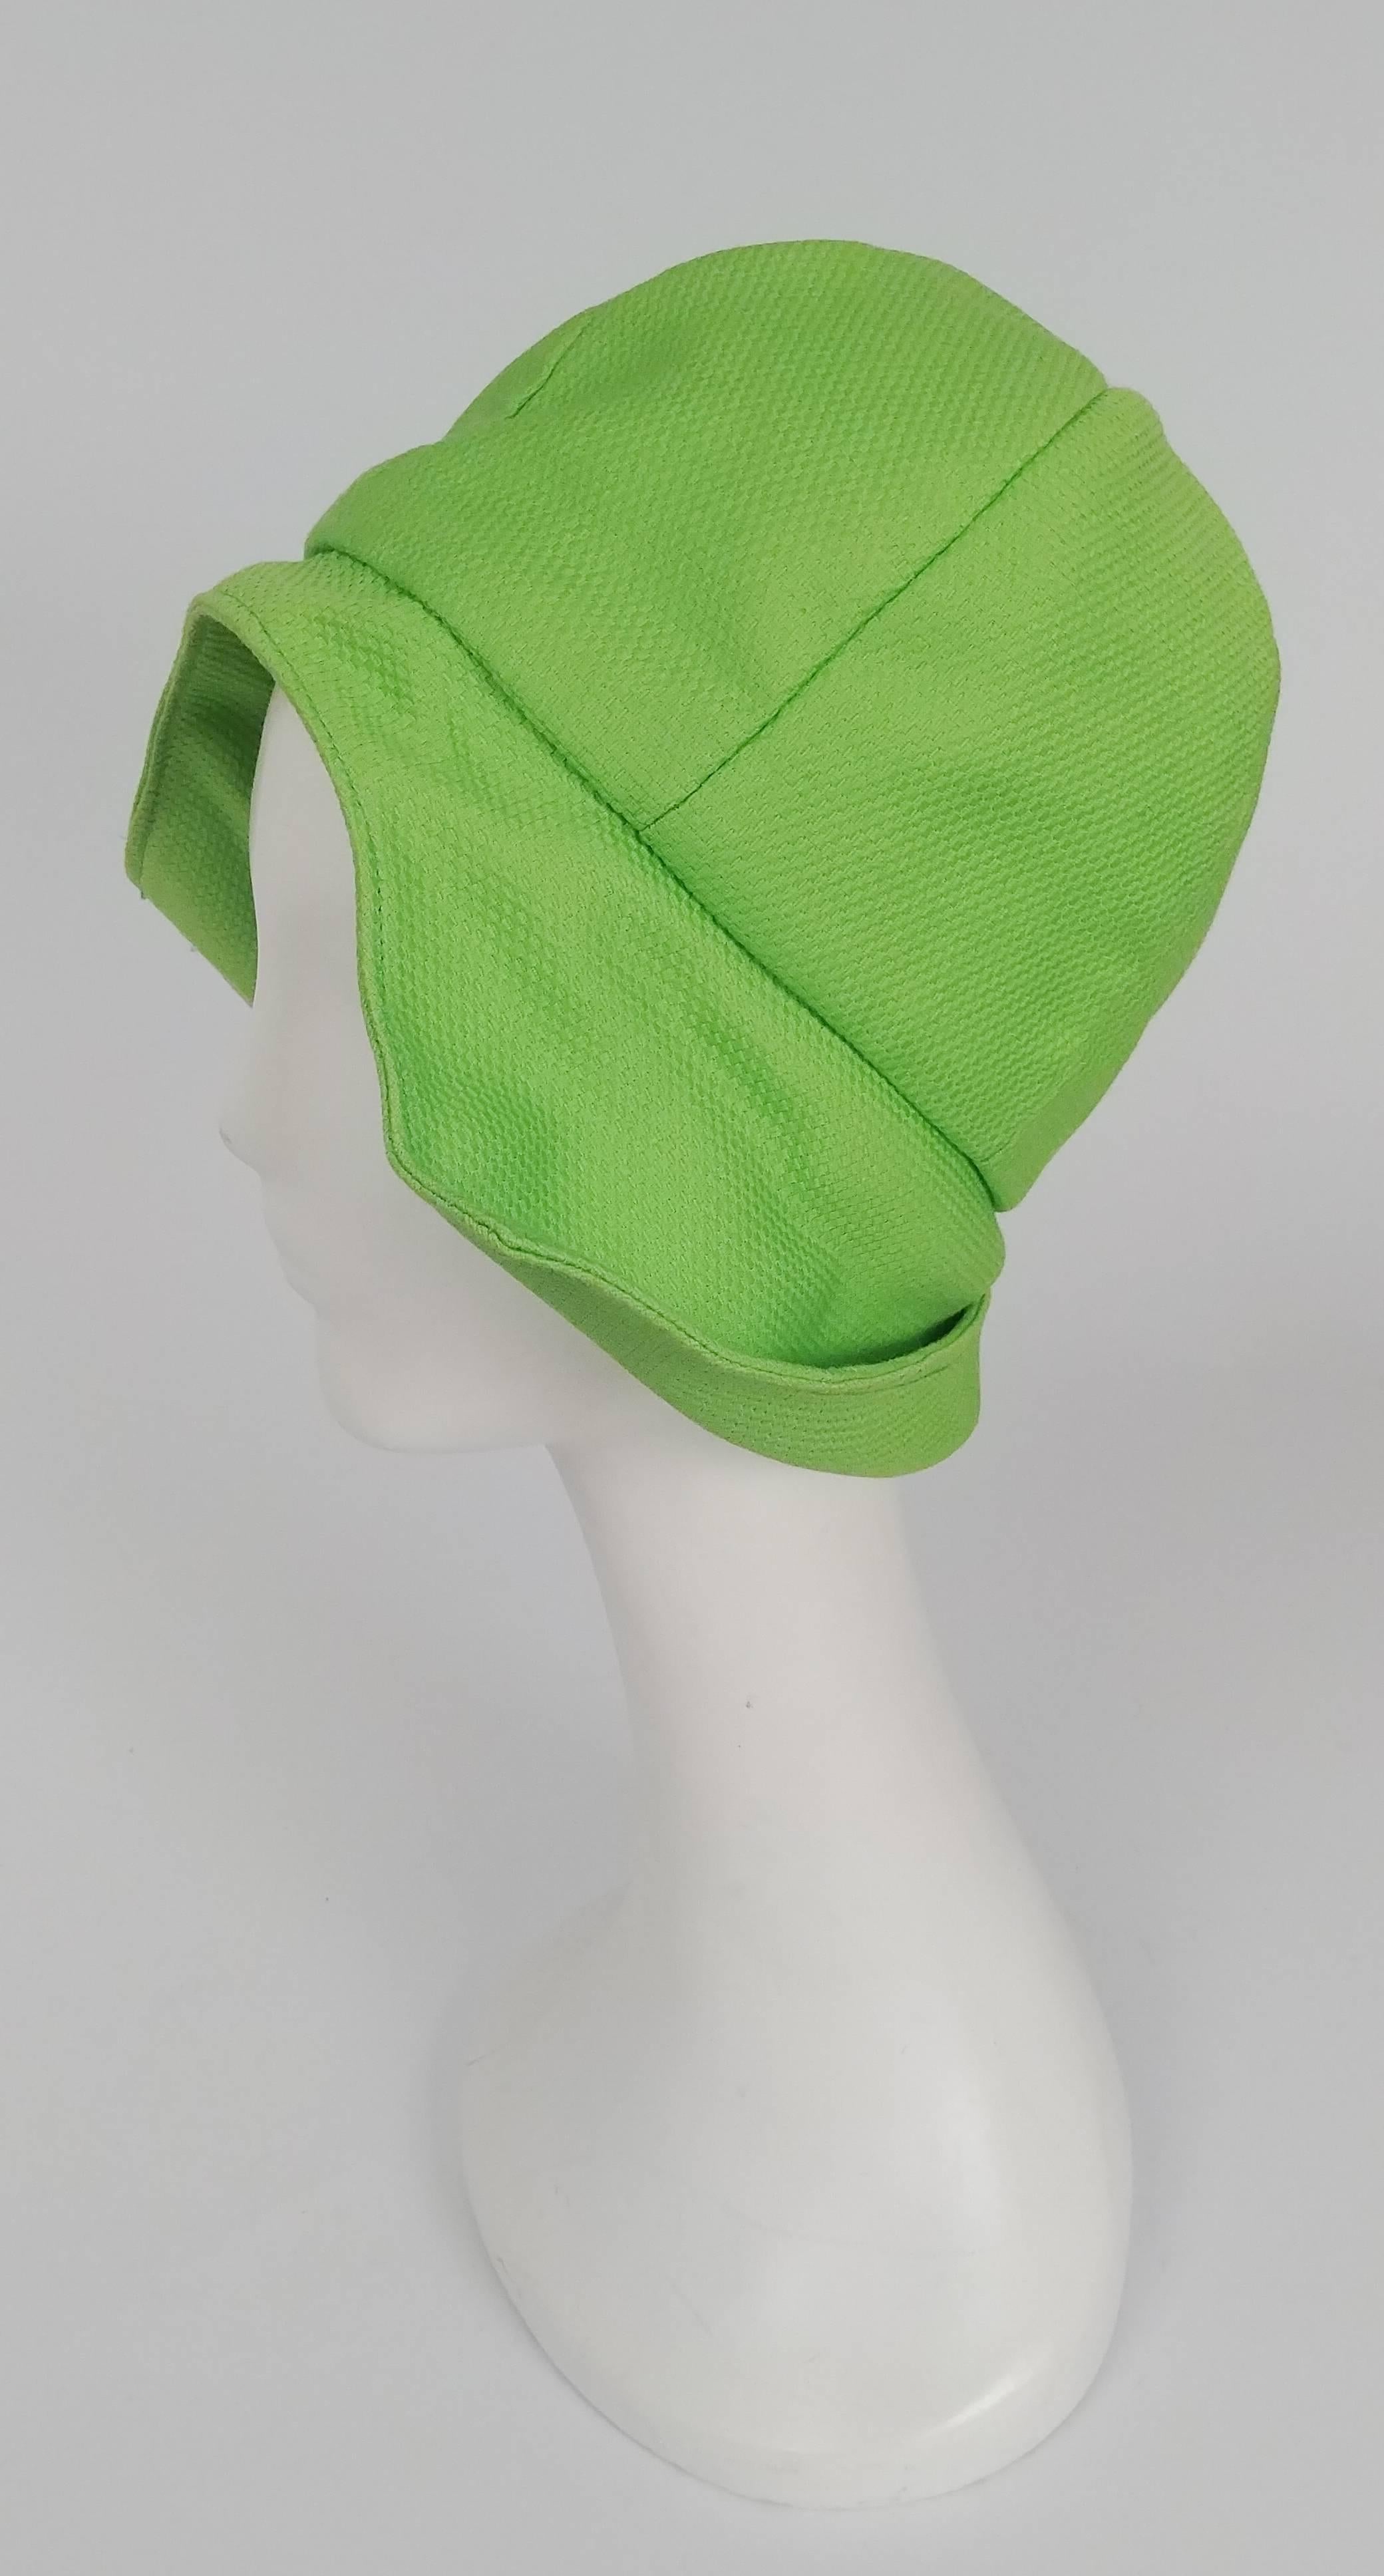 1960s Lime Green Mod Summer Cloche Hat. Inner drawstring allows for adjustability. Dead stock w/ tags.